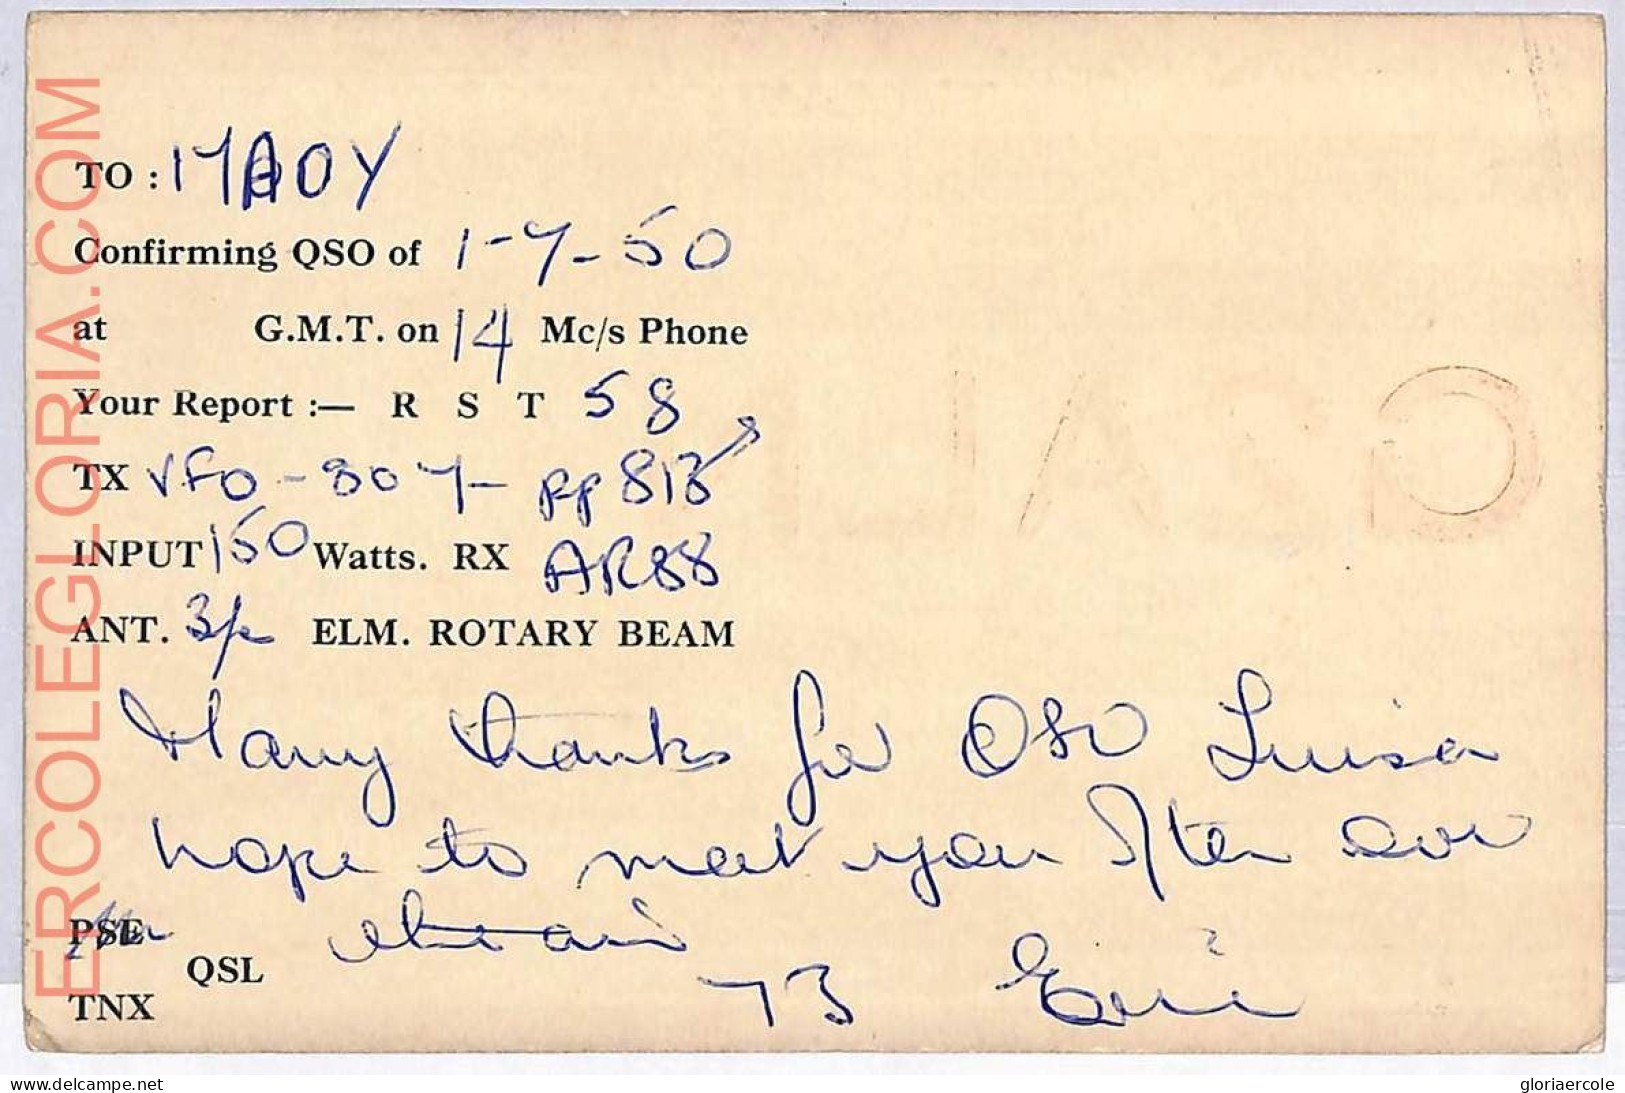 Ad9077 - GREAT BRITAIN - RADIO FREQUENCY CARD - England,Manchester - 1950 - Radio